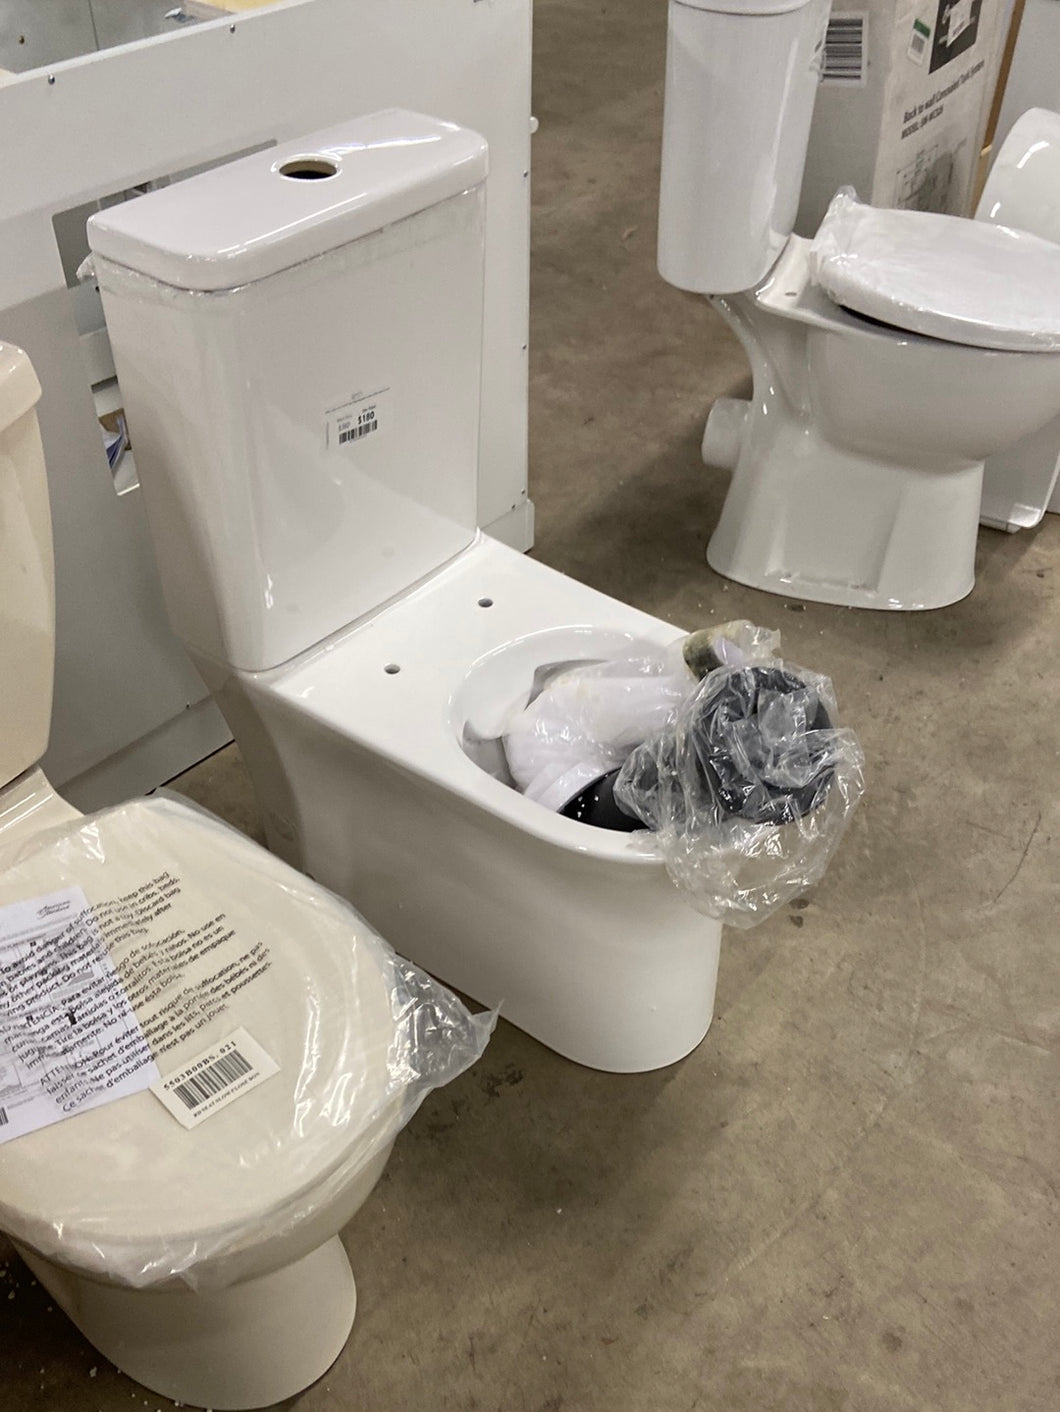 Calice 2-piece 0.8/1.28 GPF Dual Flush Elongated Toilet in White Seat Included